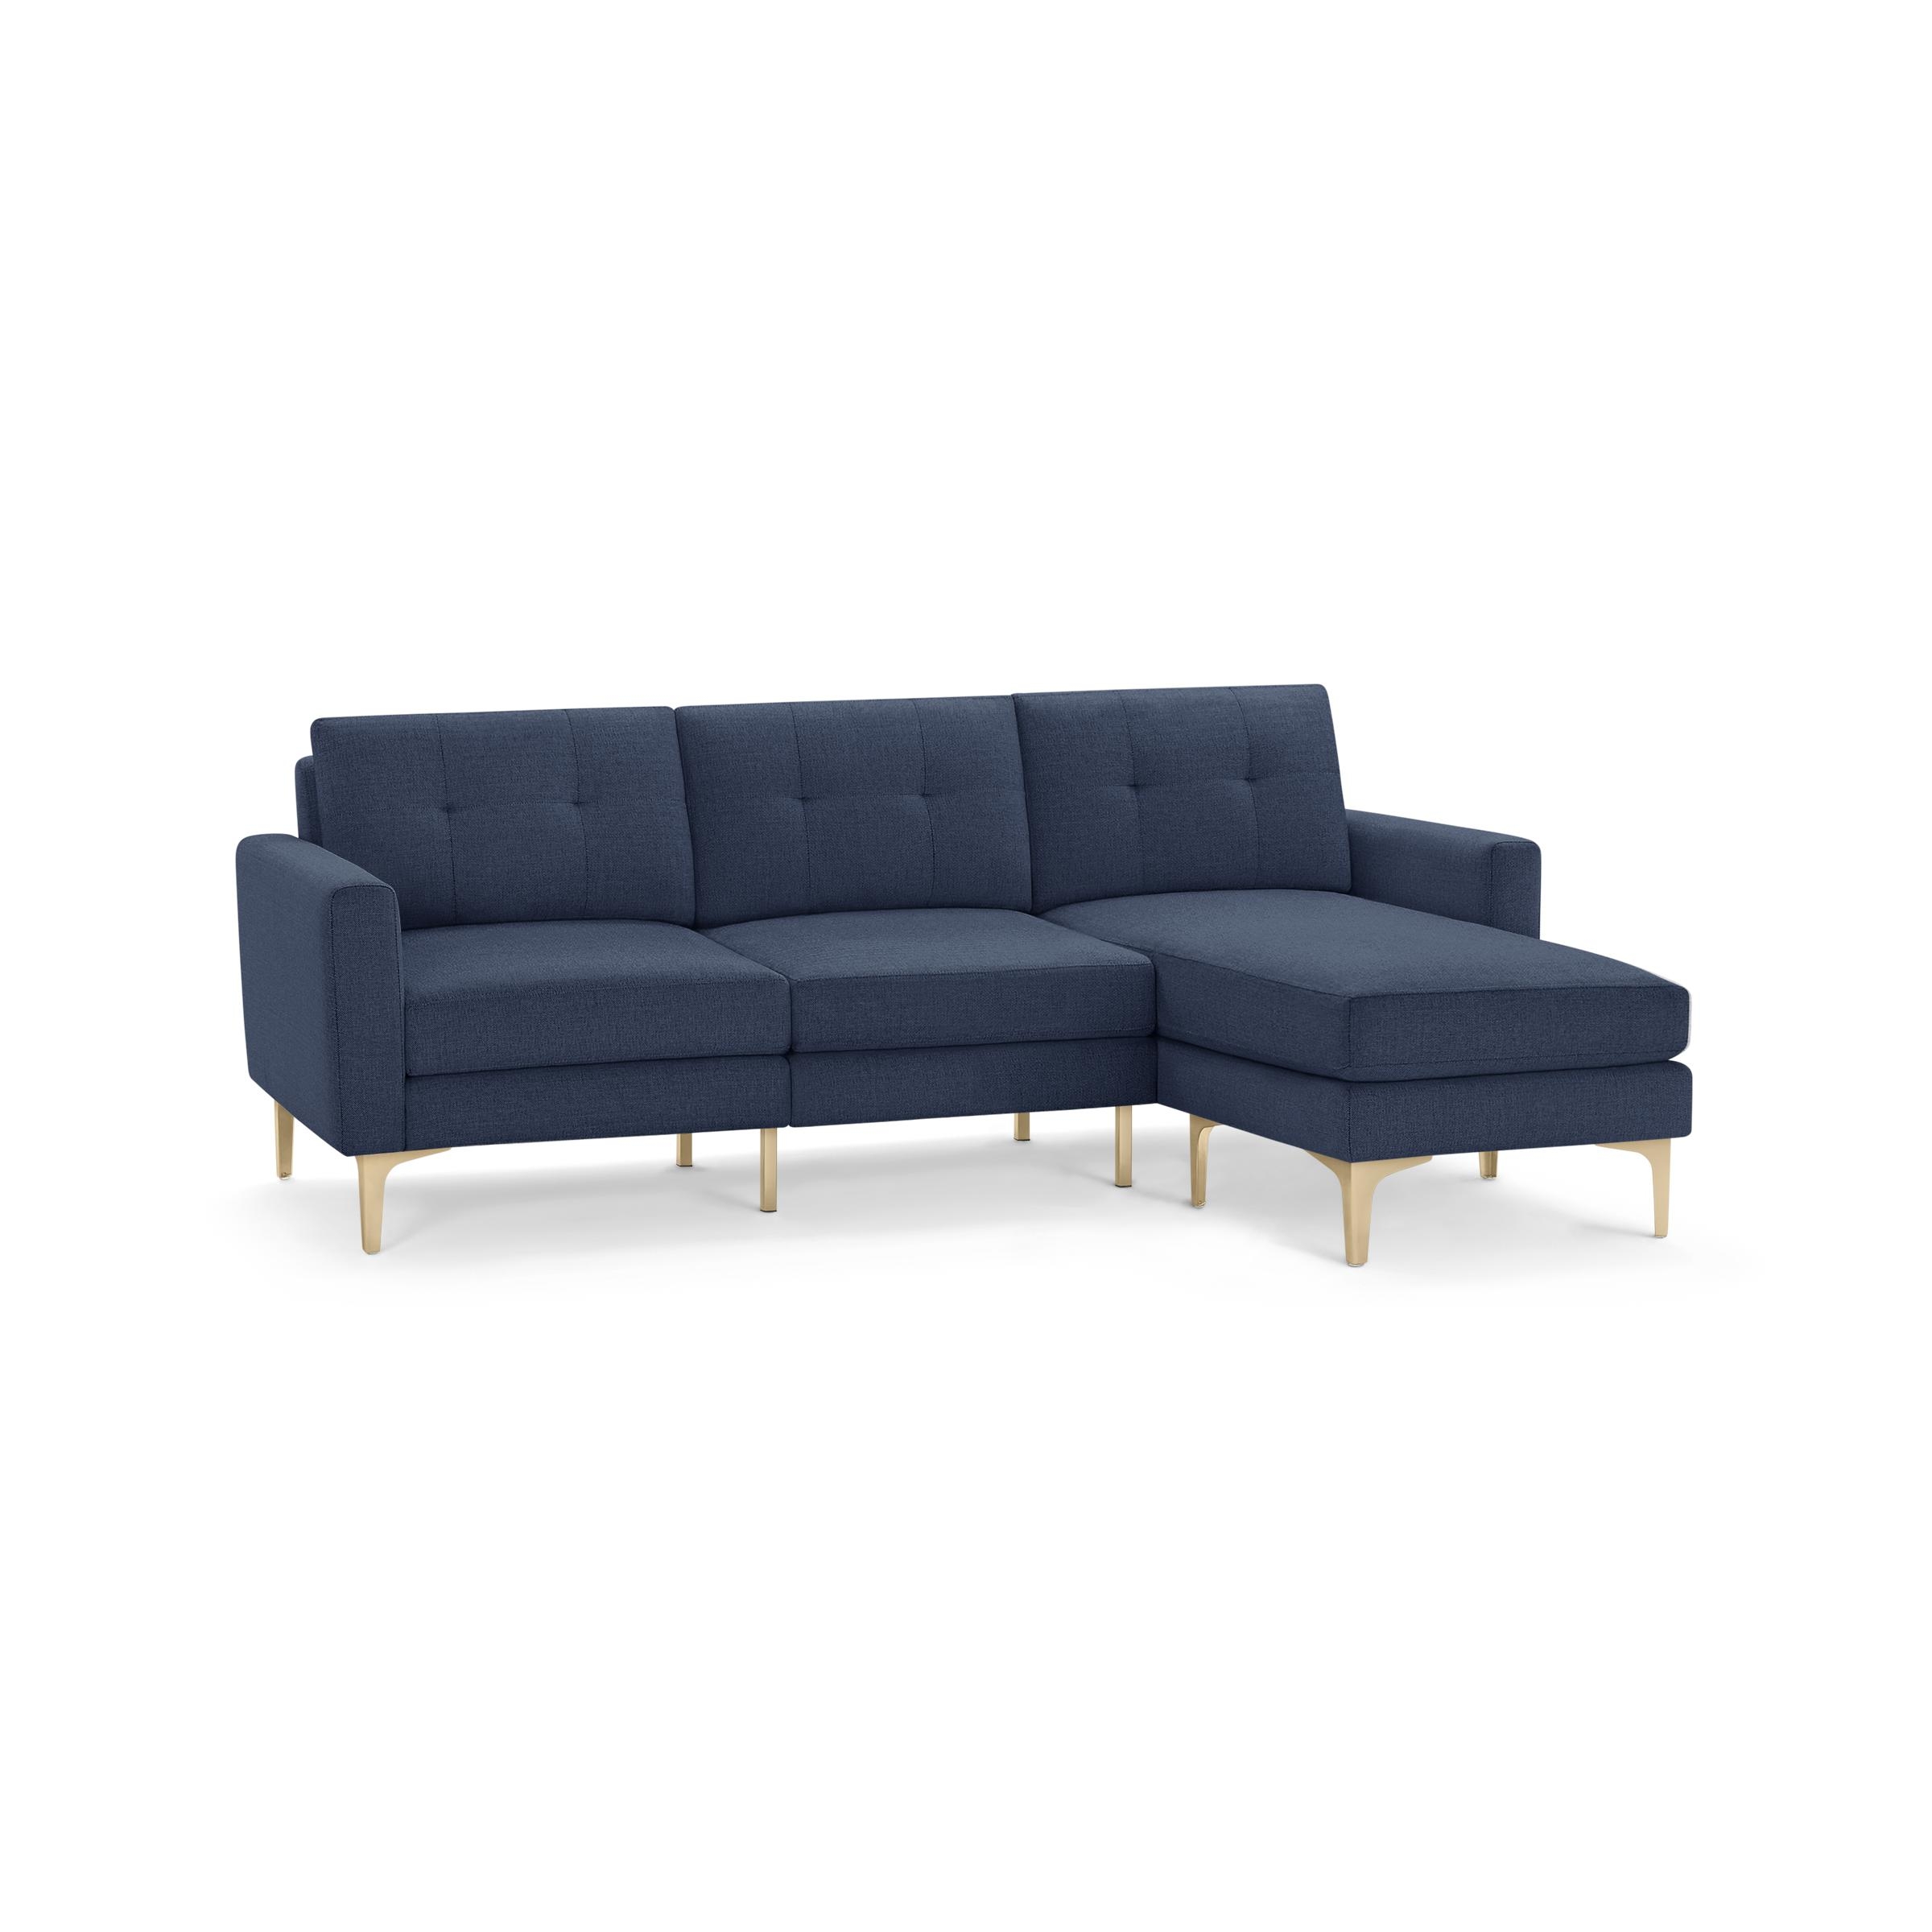 Nomad Sofa Sectional in Navy Blue, Brass Legs - Image 0